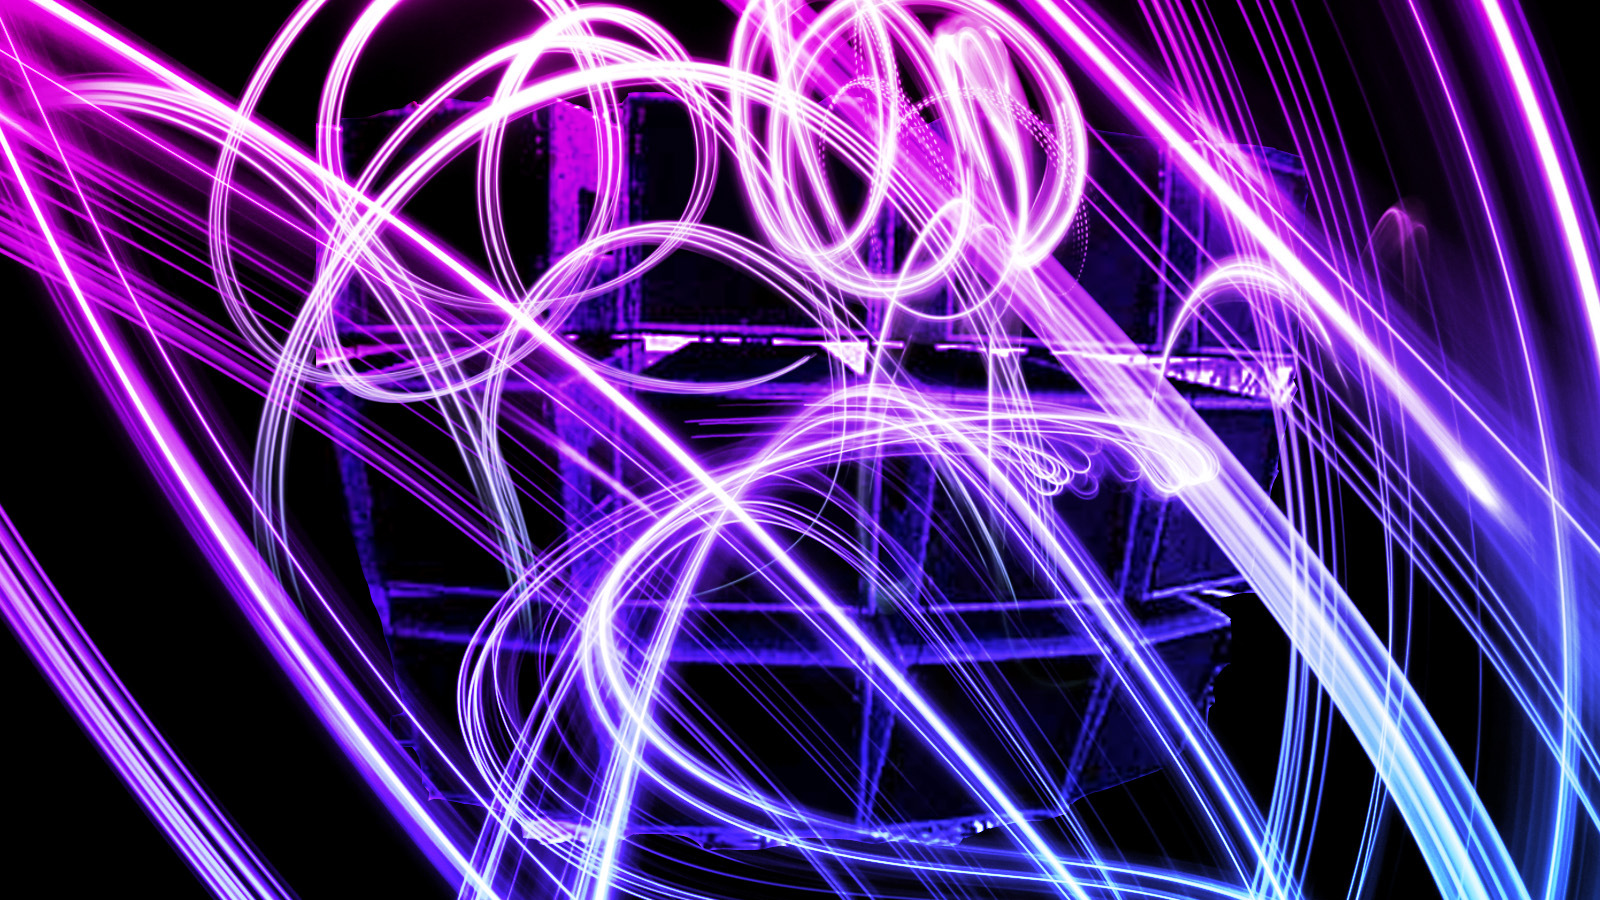 Neon Lights Background By Joe Chacho